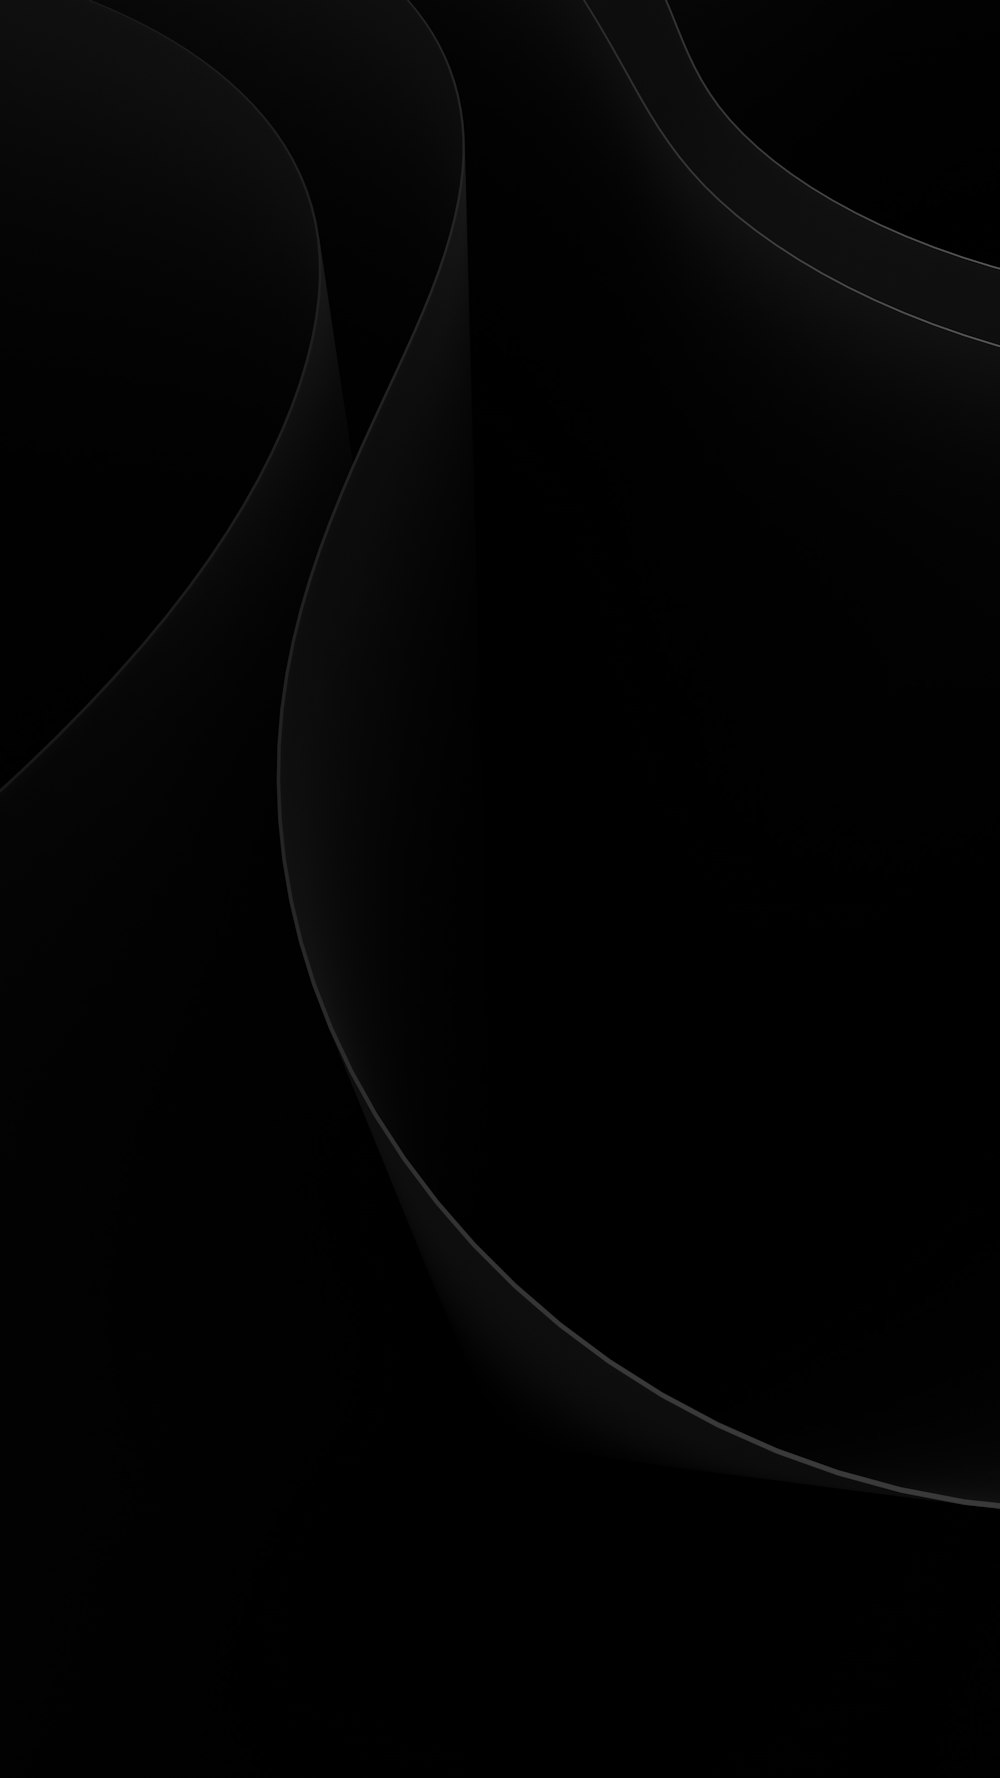 an abstract black background with curved curves